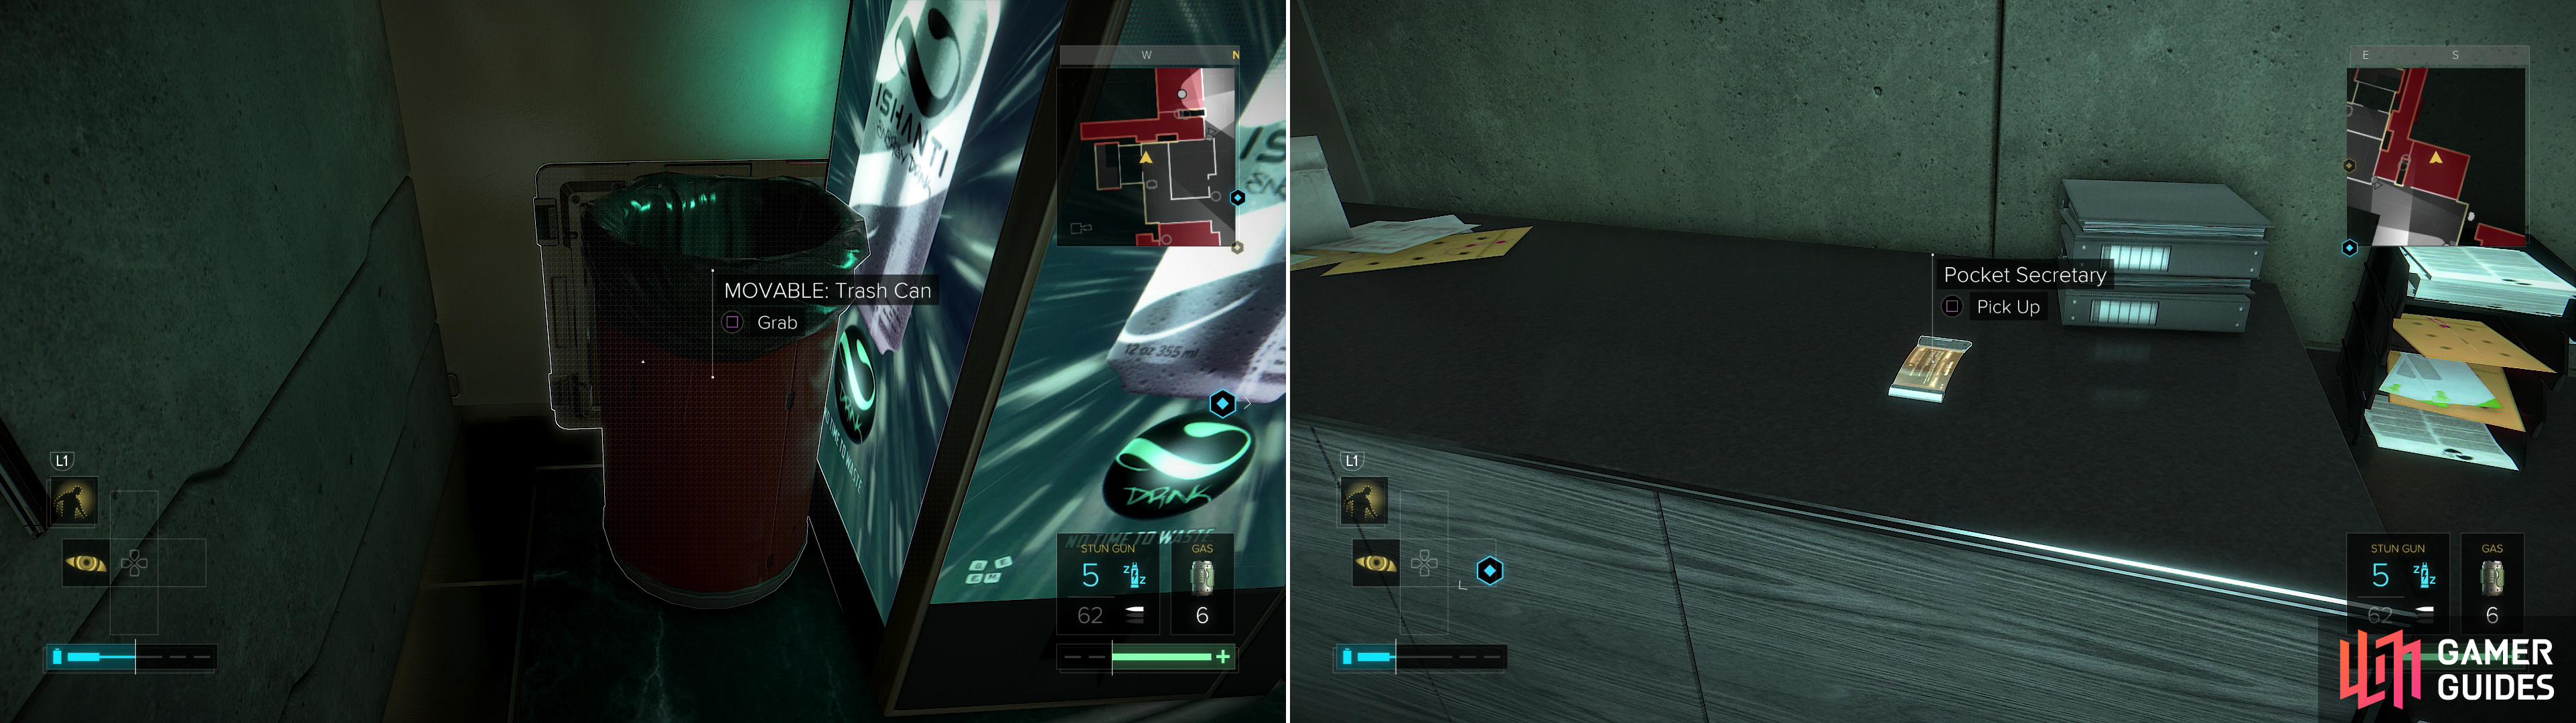 Move a Trash Can out of the way to reveal a vent (left) then sneak into a security office to find a Pocket Secretary you’ll need to disable more security (right).